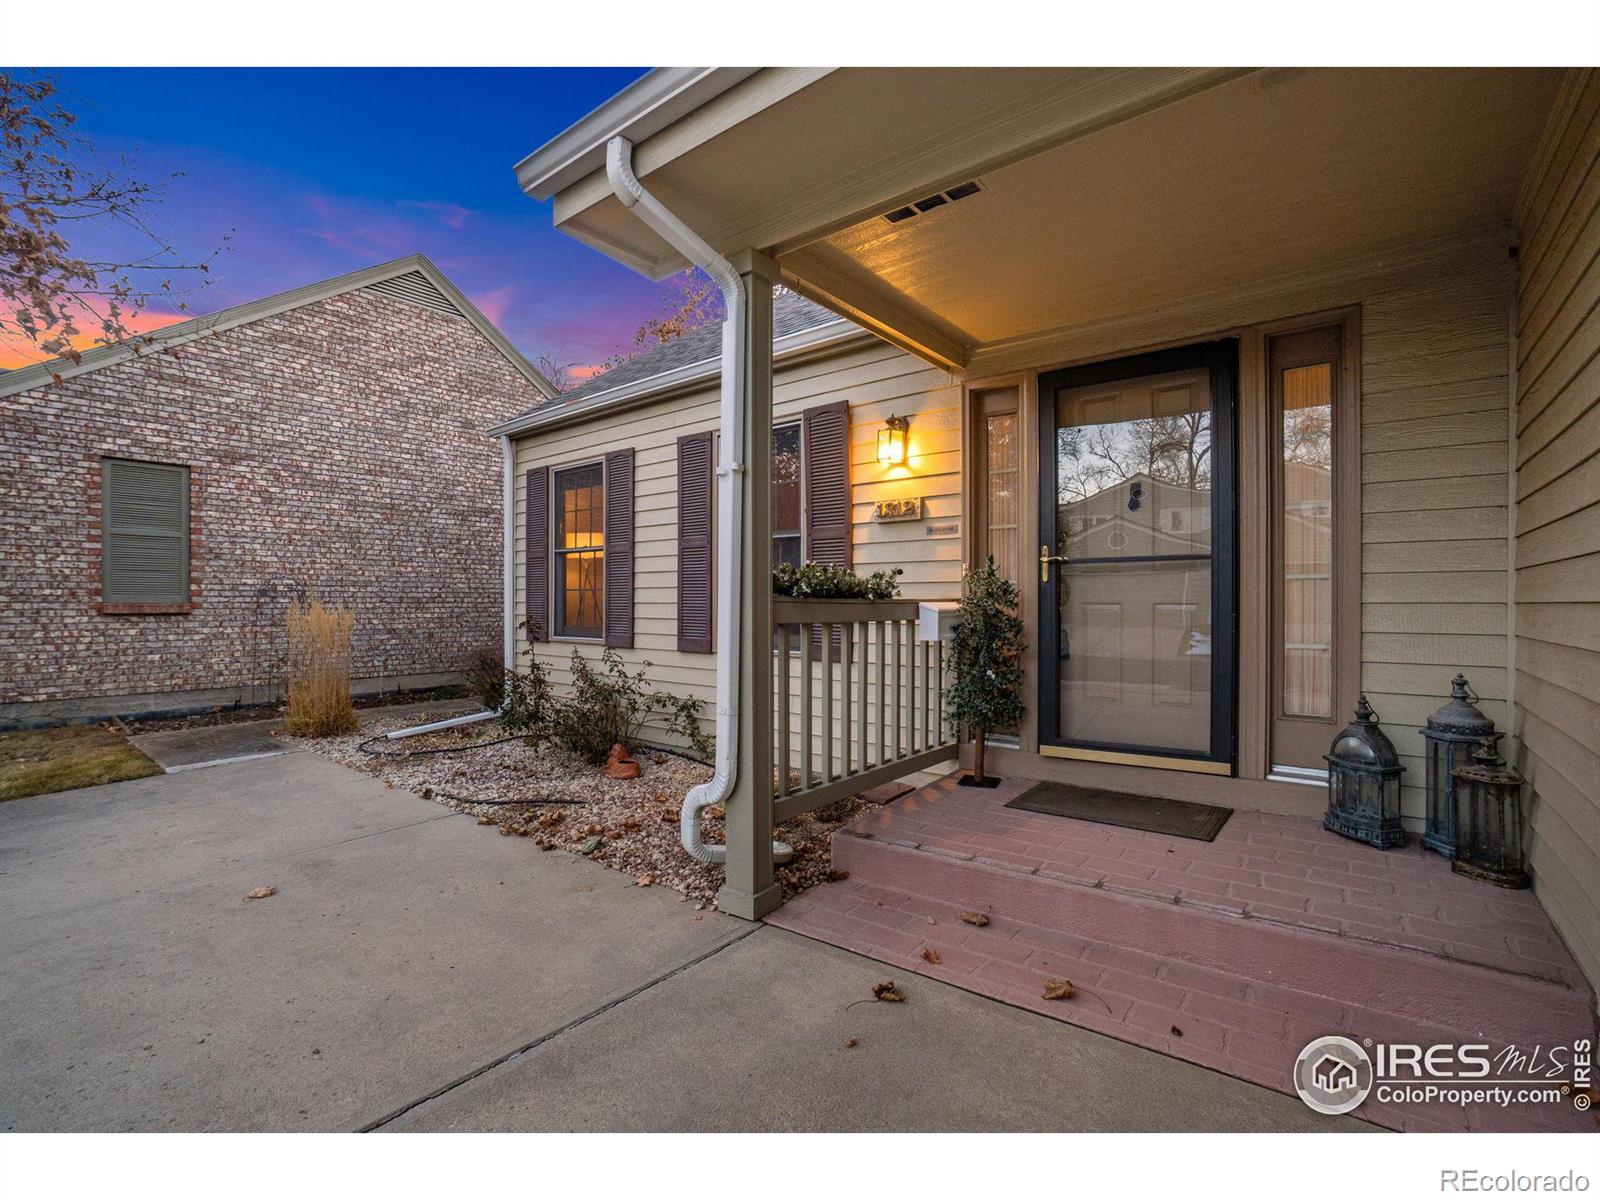 1312  tuckaway court, Fort Collins sold home. Closed on 2024-02-20 for $439,000.